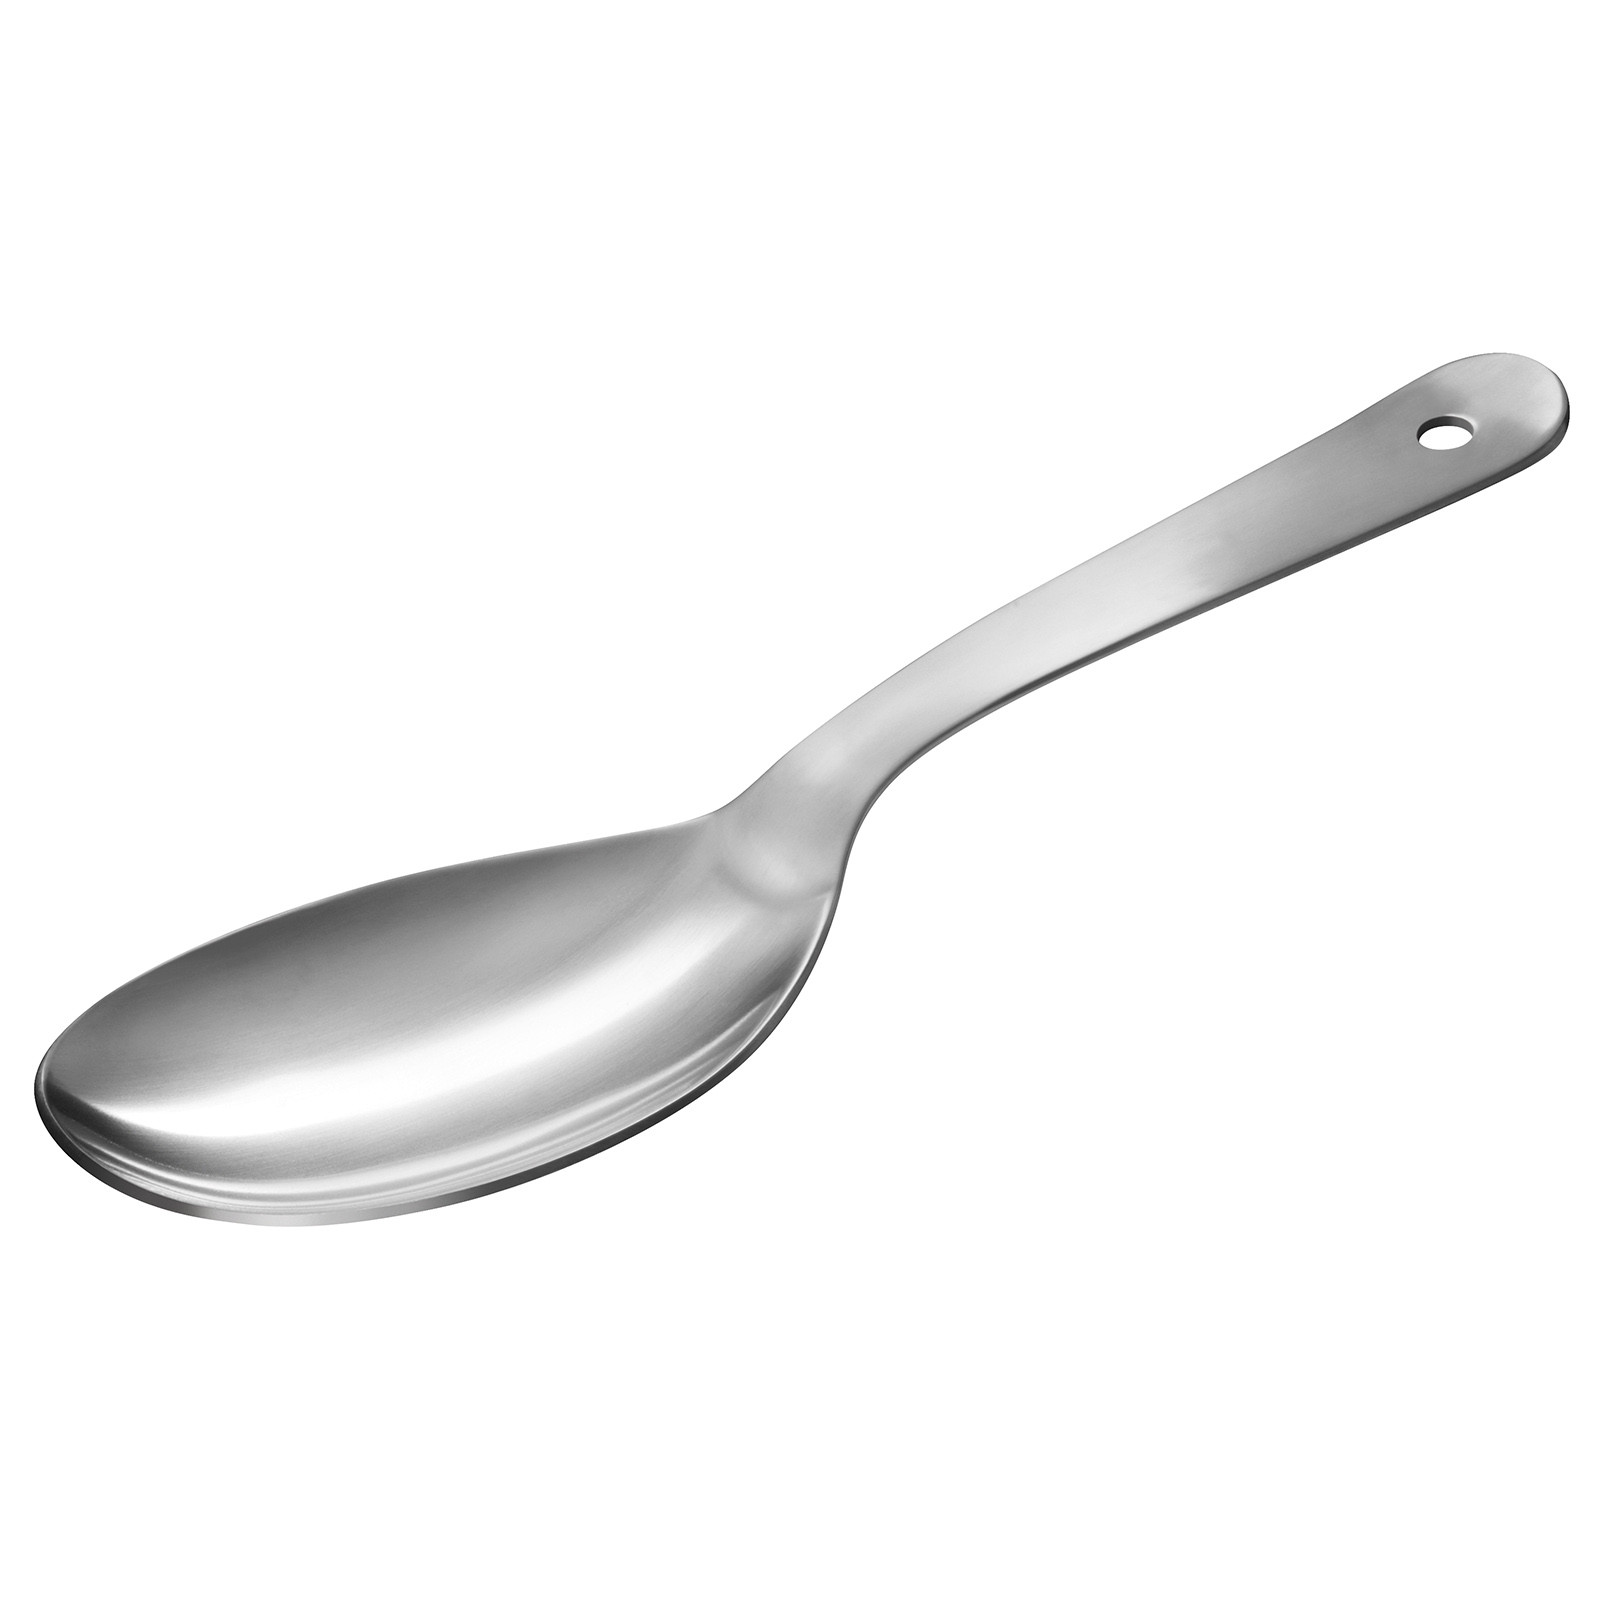 Set of 2 IMEEA Slotted Spoon Serving Spoon Stainless Steel Perforated Spoon 12.8-Inch